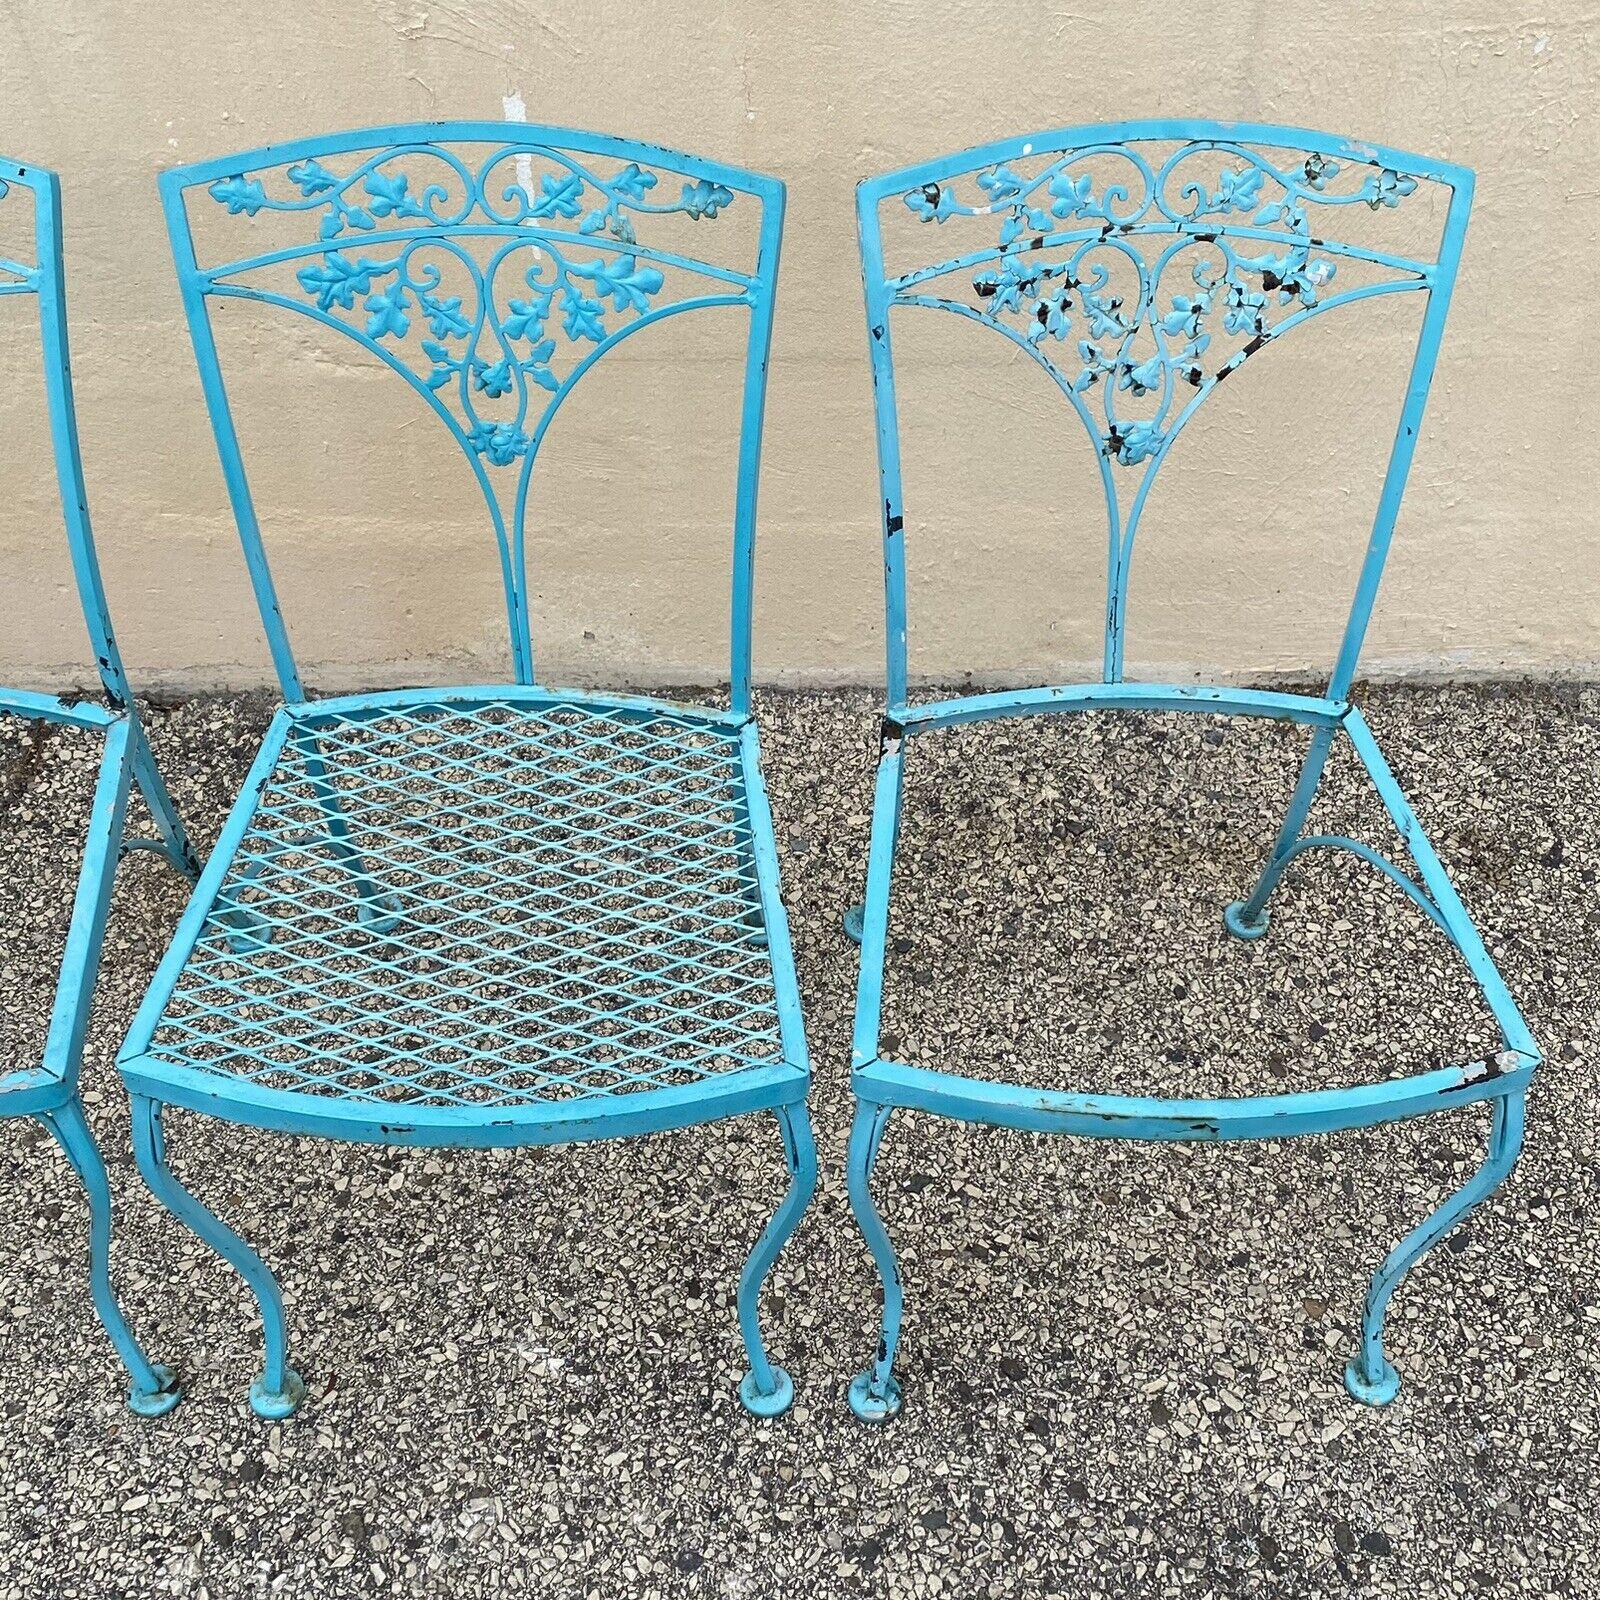 Victorian Vintage Woodard Orleans Pattern Wrought Iron Garden Patio Dining Chairs Set of 4 For Sale